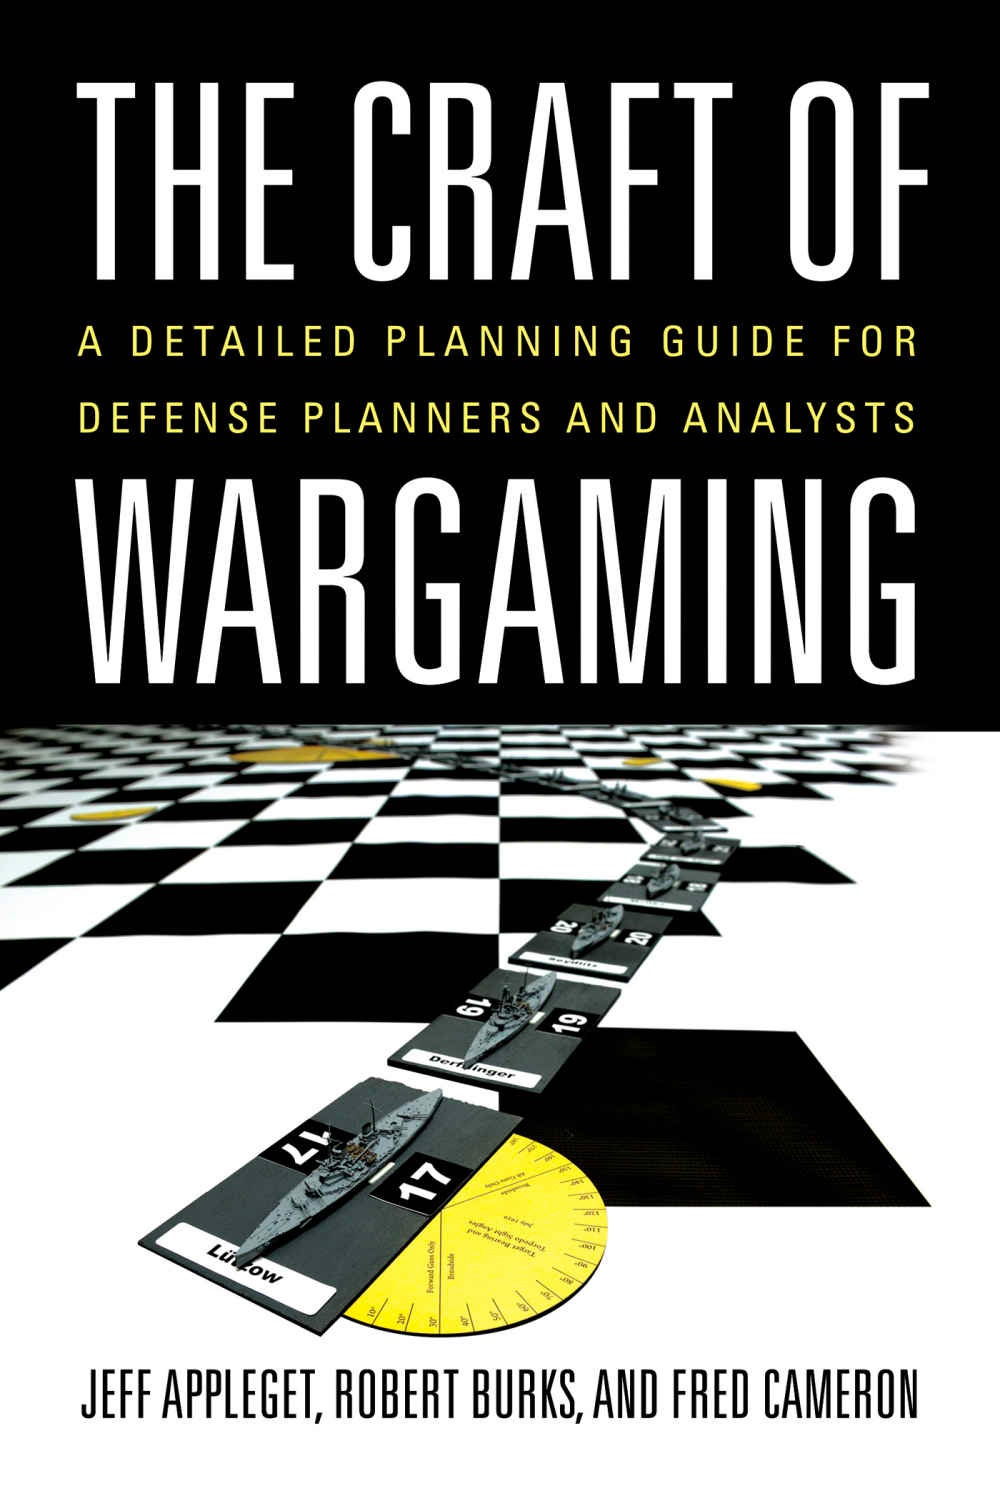 How-to Book on the Craft of Wargaming Hits the Streets